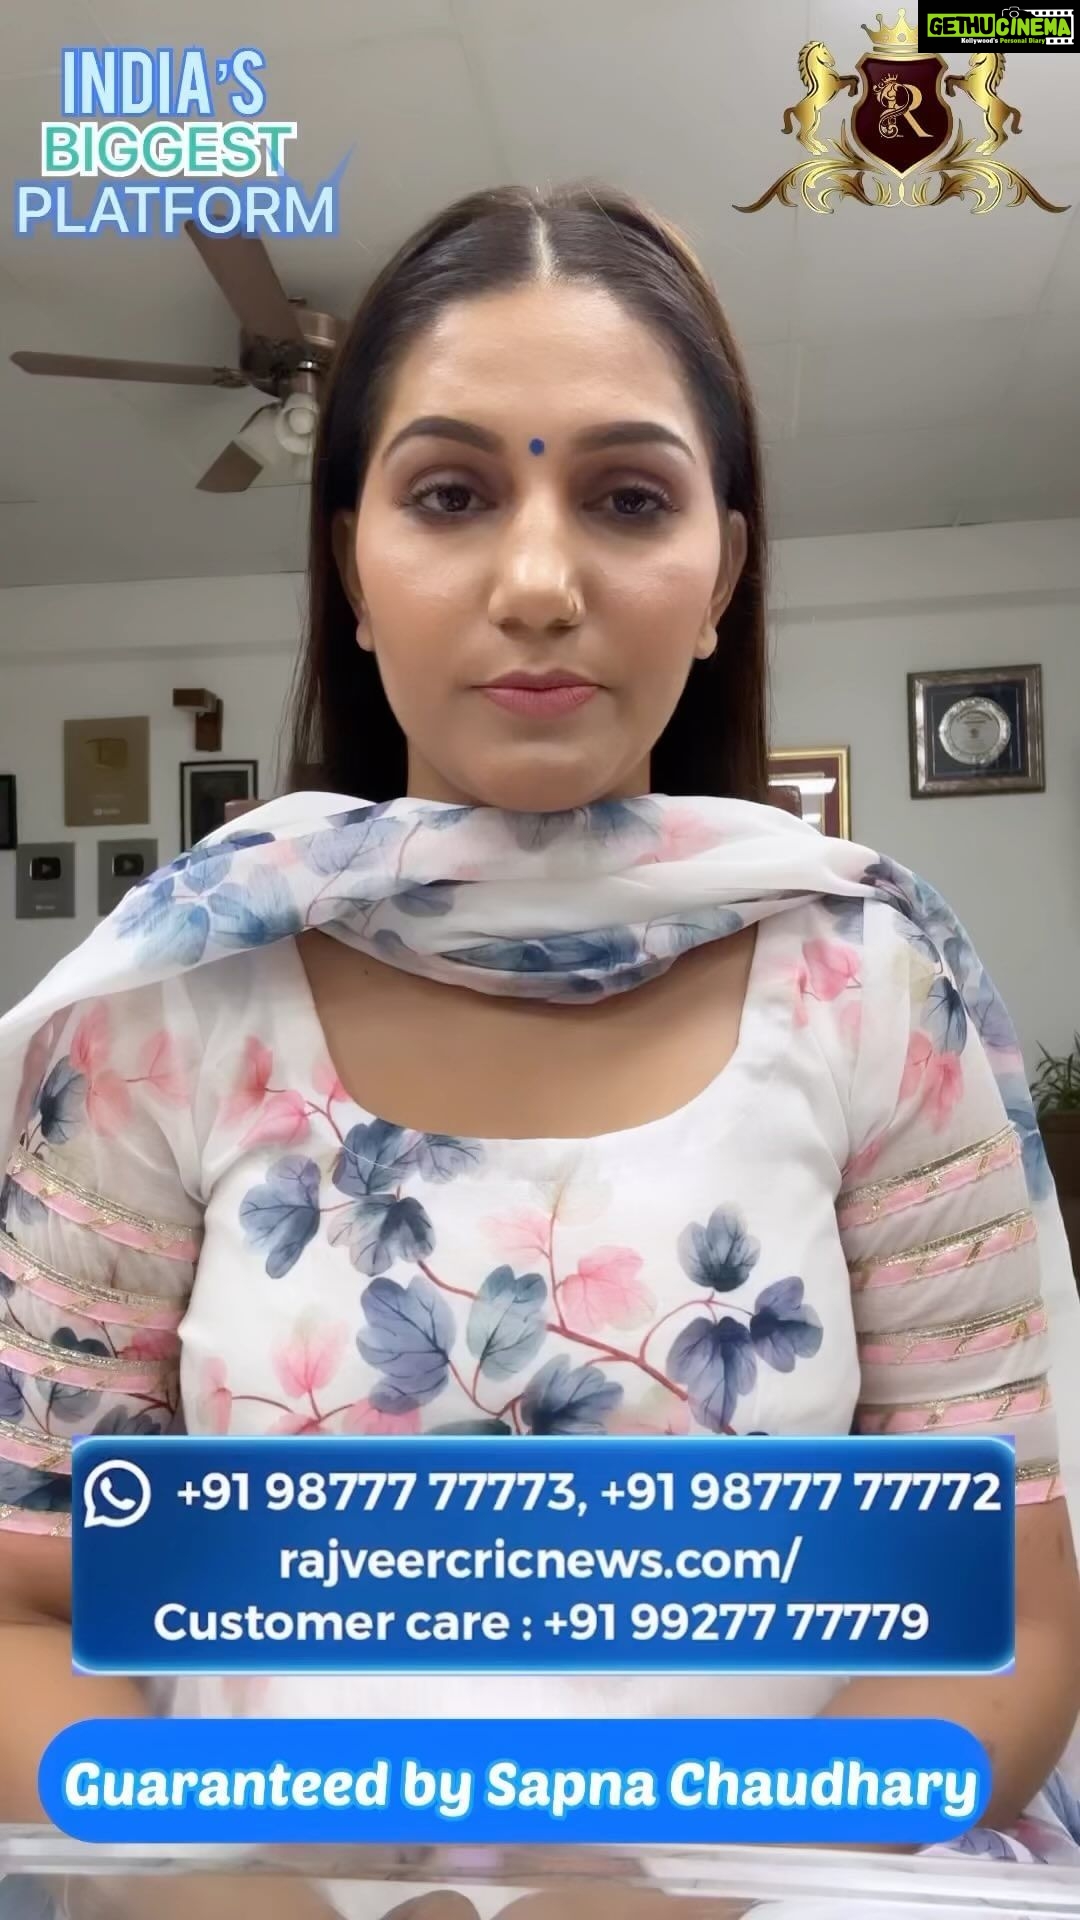 Spans Chodhare Xxx Video - Sapna Choudhary Instagram - @RAJVEEREXCHANGE @RAJVEERSPORTS_OFFICIALS Book  No 1 Online Gaming Abhi Follow Karo 10,00,000+ Clients INDIA'S MOST  EXCLUSIVE LICENSED GAMING COMPANY IN INDIA.. The Only Trusted And Most  Secure Online Exchange